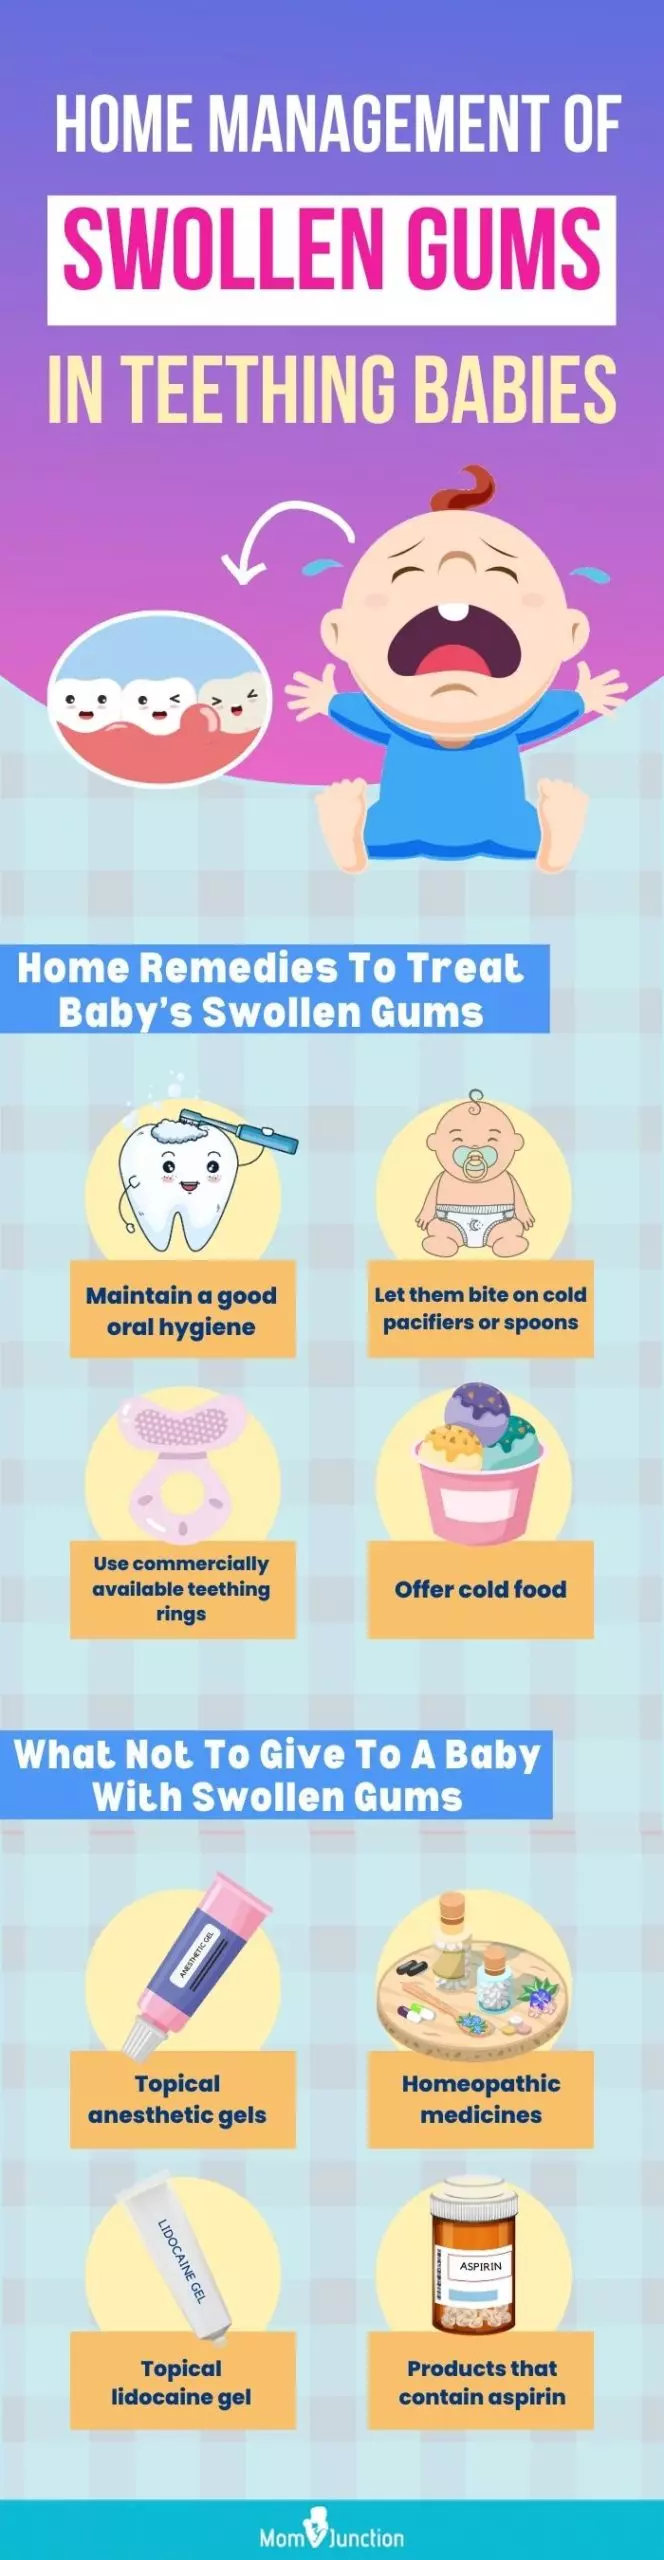 home management of swollen gums in teething babies (infographic)